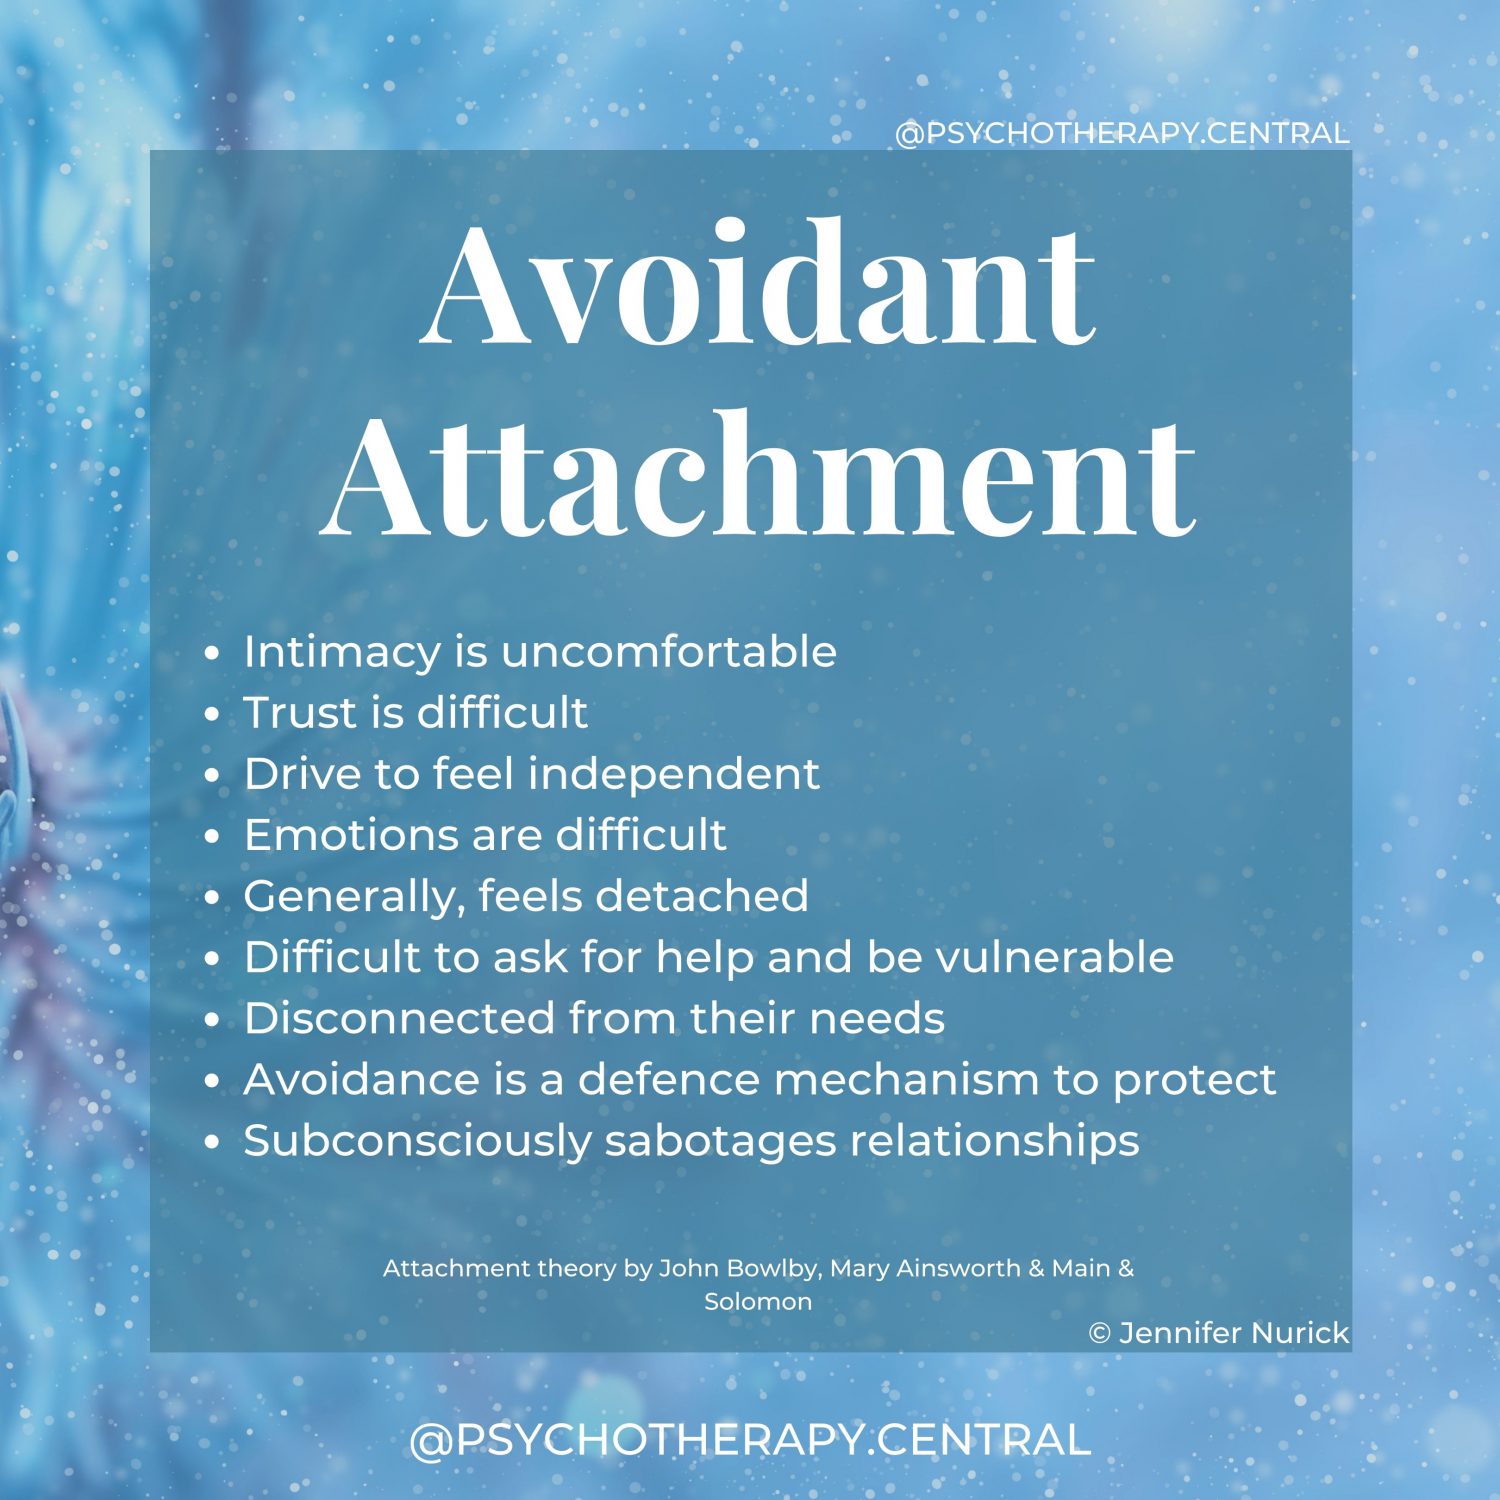 Intimacy is uncomfortable Difficult to trust Drive to feel independent Emotions are difficult Generally, feels detached Difficult to ask for help and be vulnerable Disconnected from their needs Avoidance is a defence mechanism to protect Subconsciously sabotages relationships